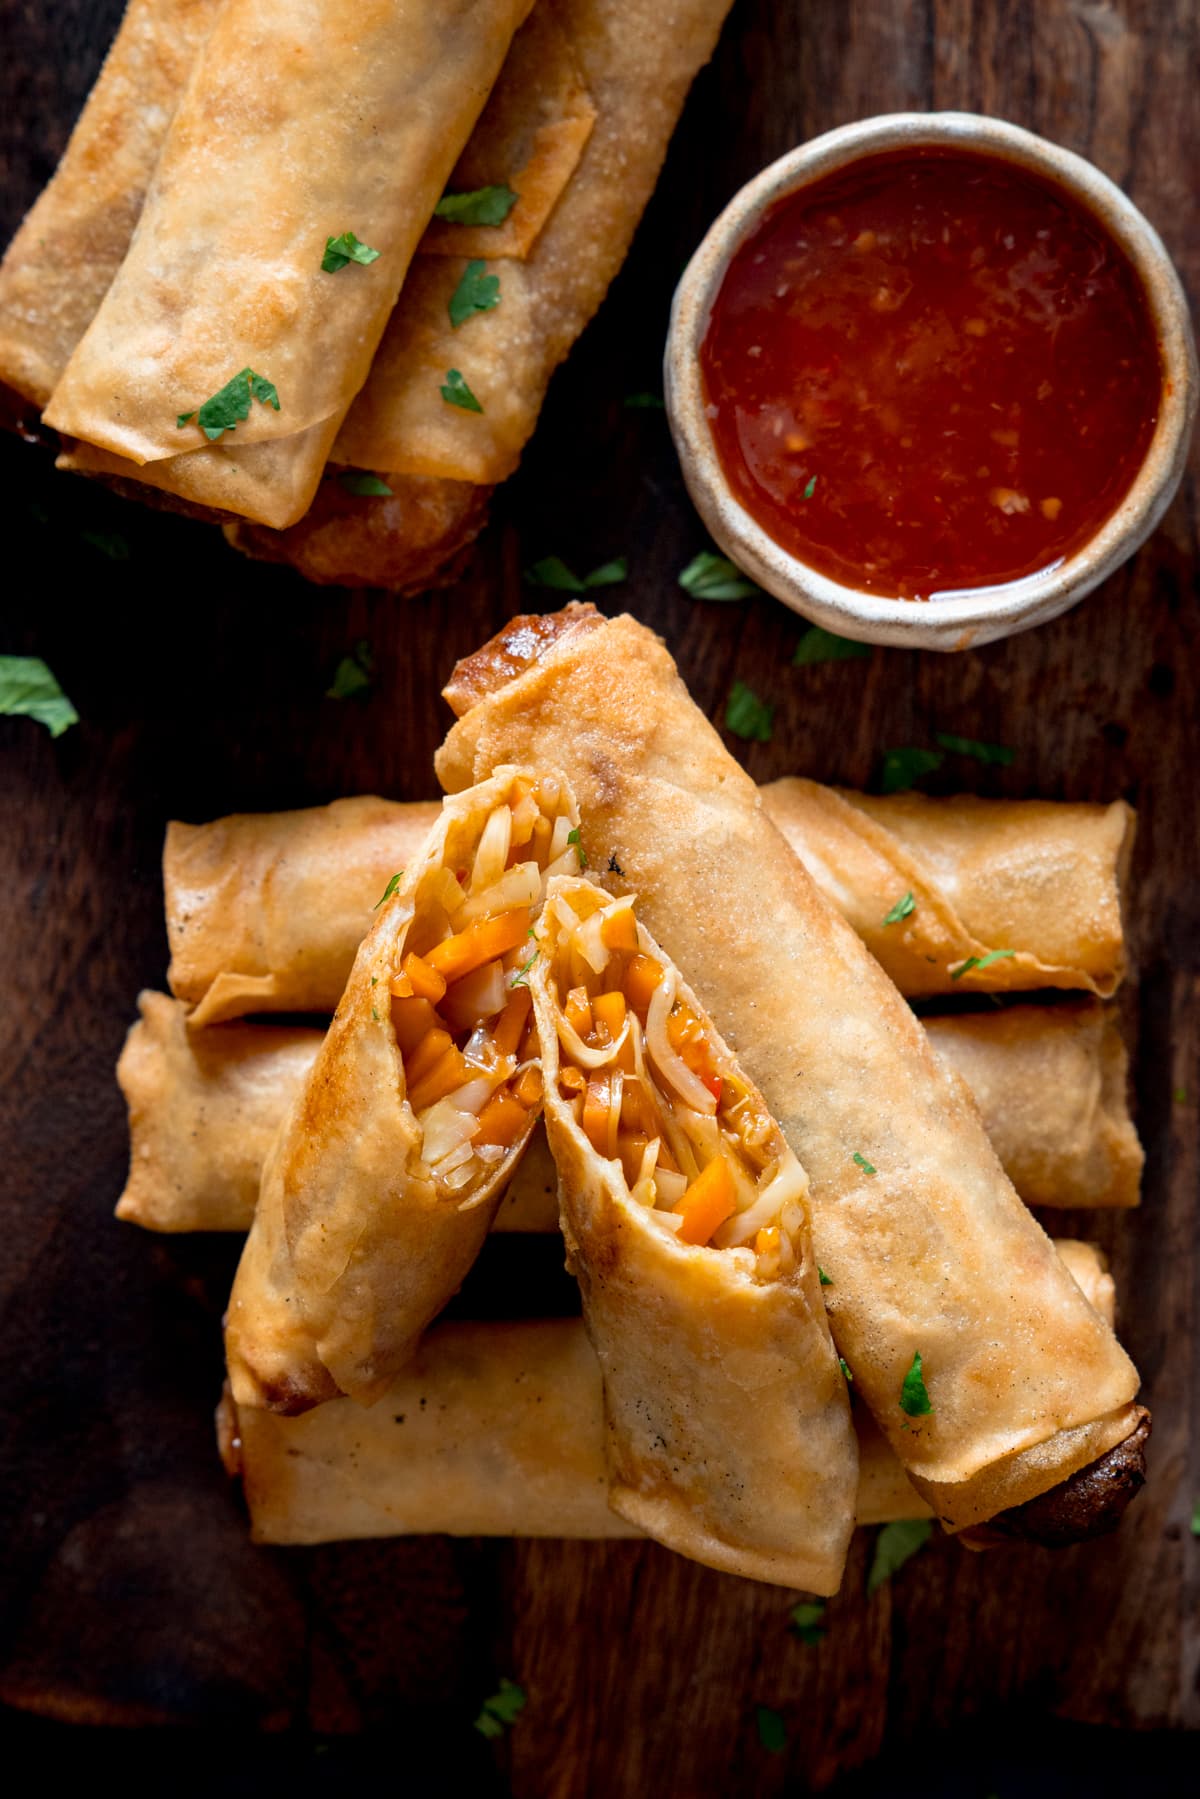 Close up picture of a sliced open vegetable spring roll showing the filling. The open spring roll is sat on top of a stack of other spring rolls.